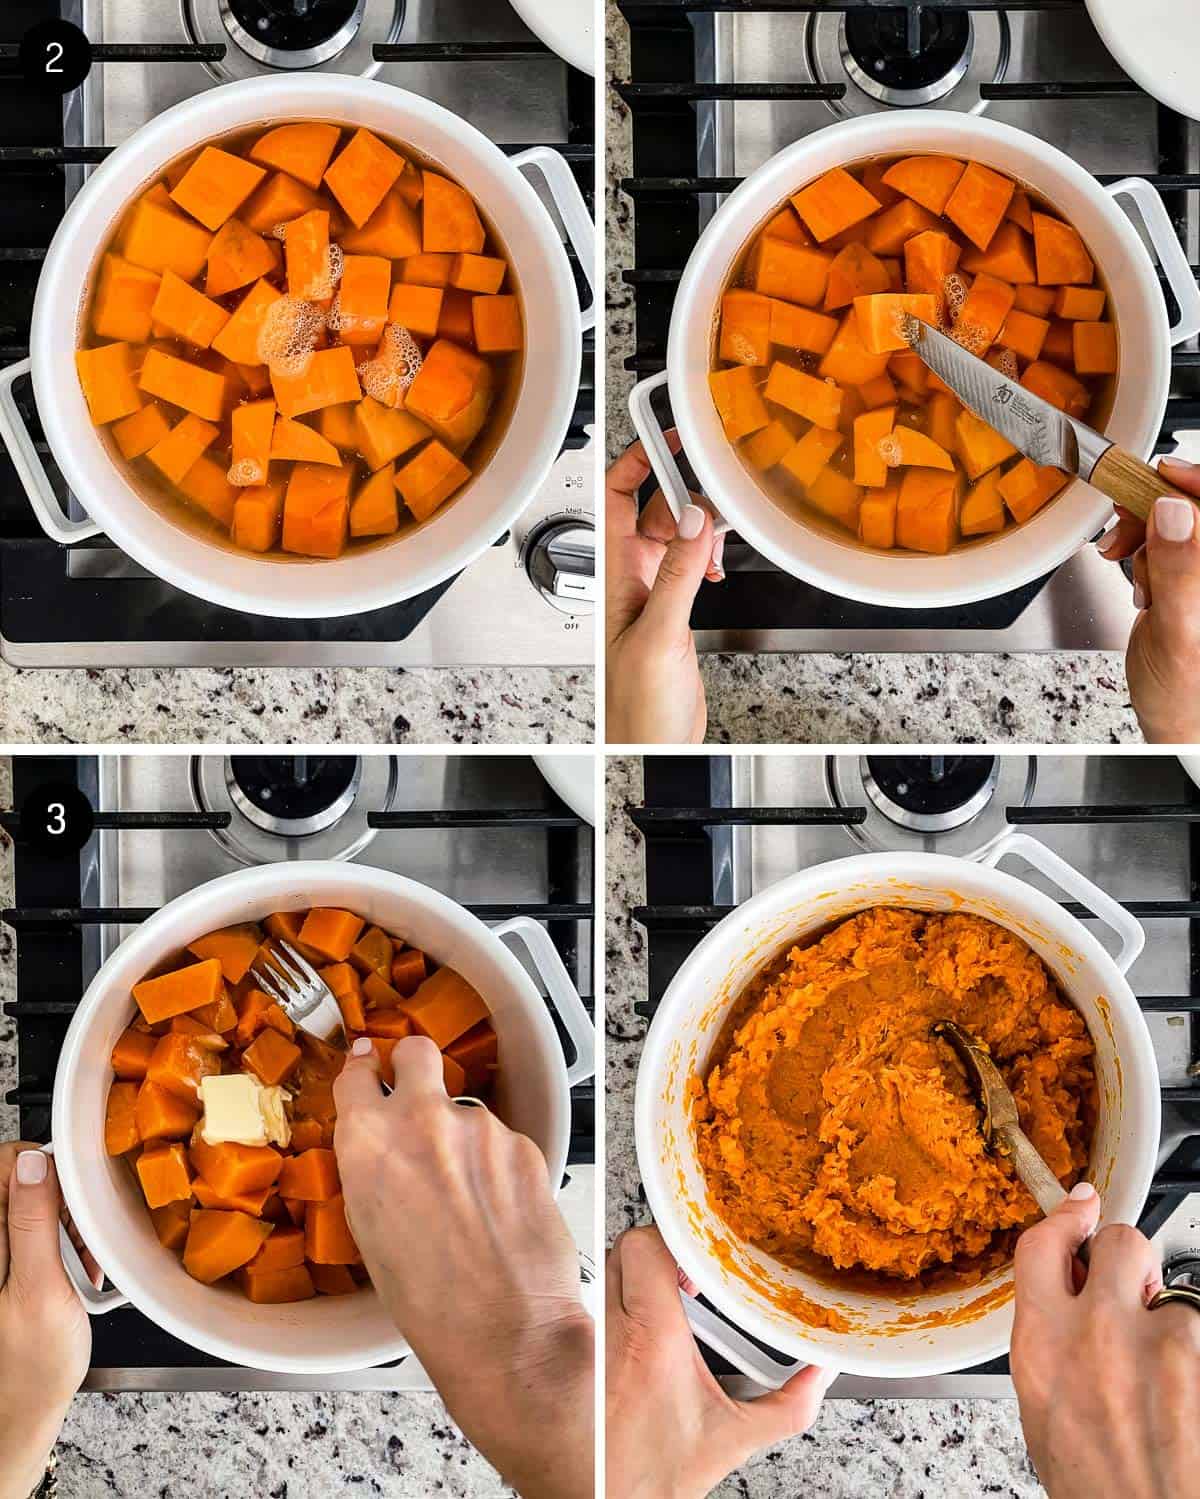 A person showing how to boil and mash sweet potatoes from the top view.